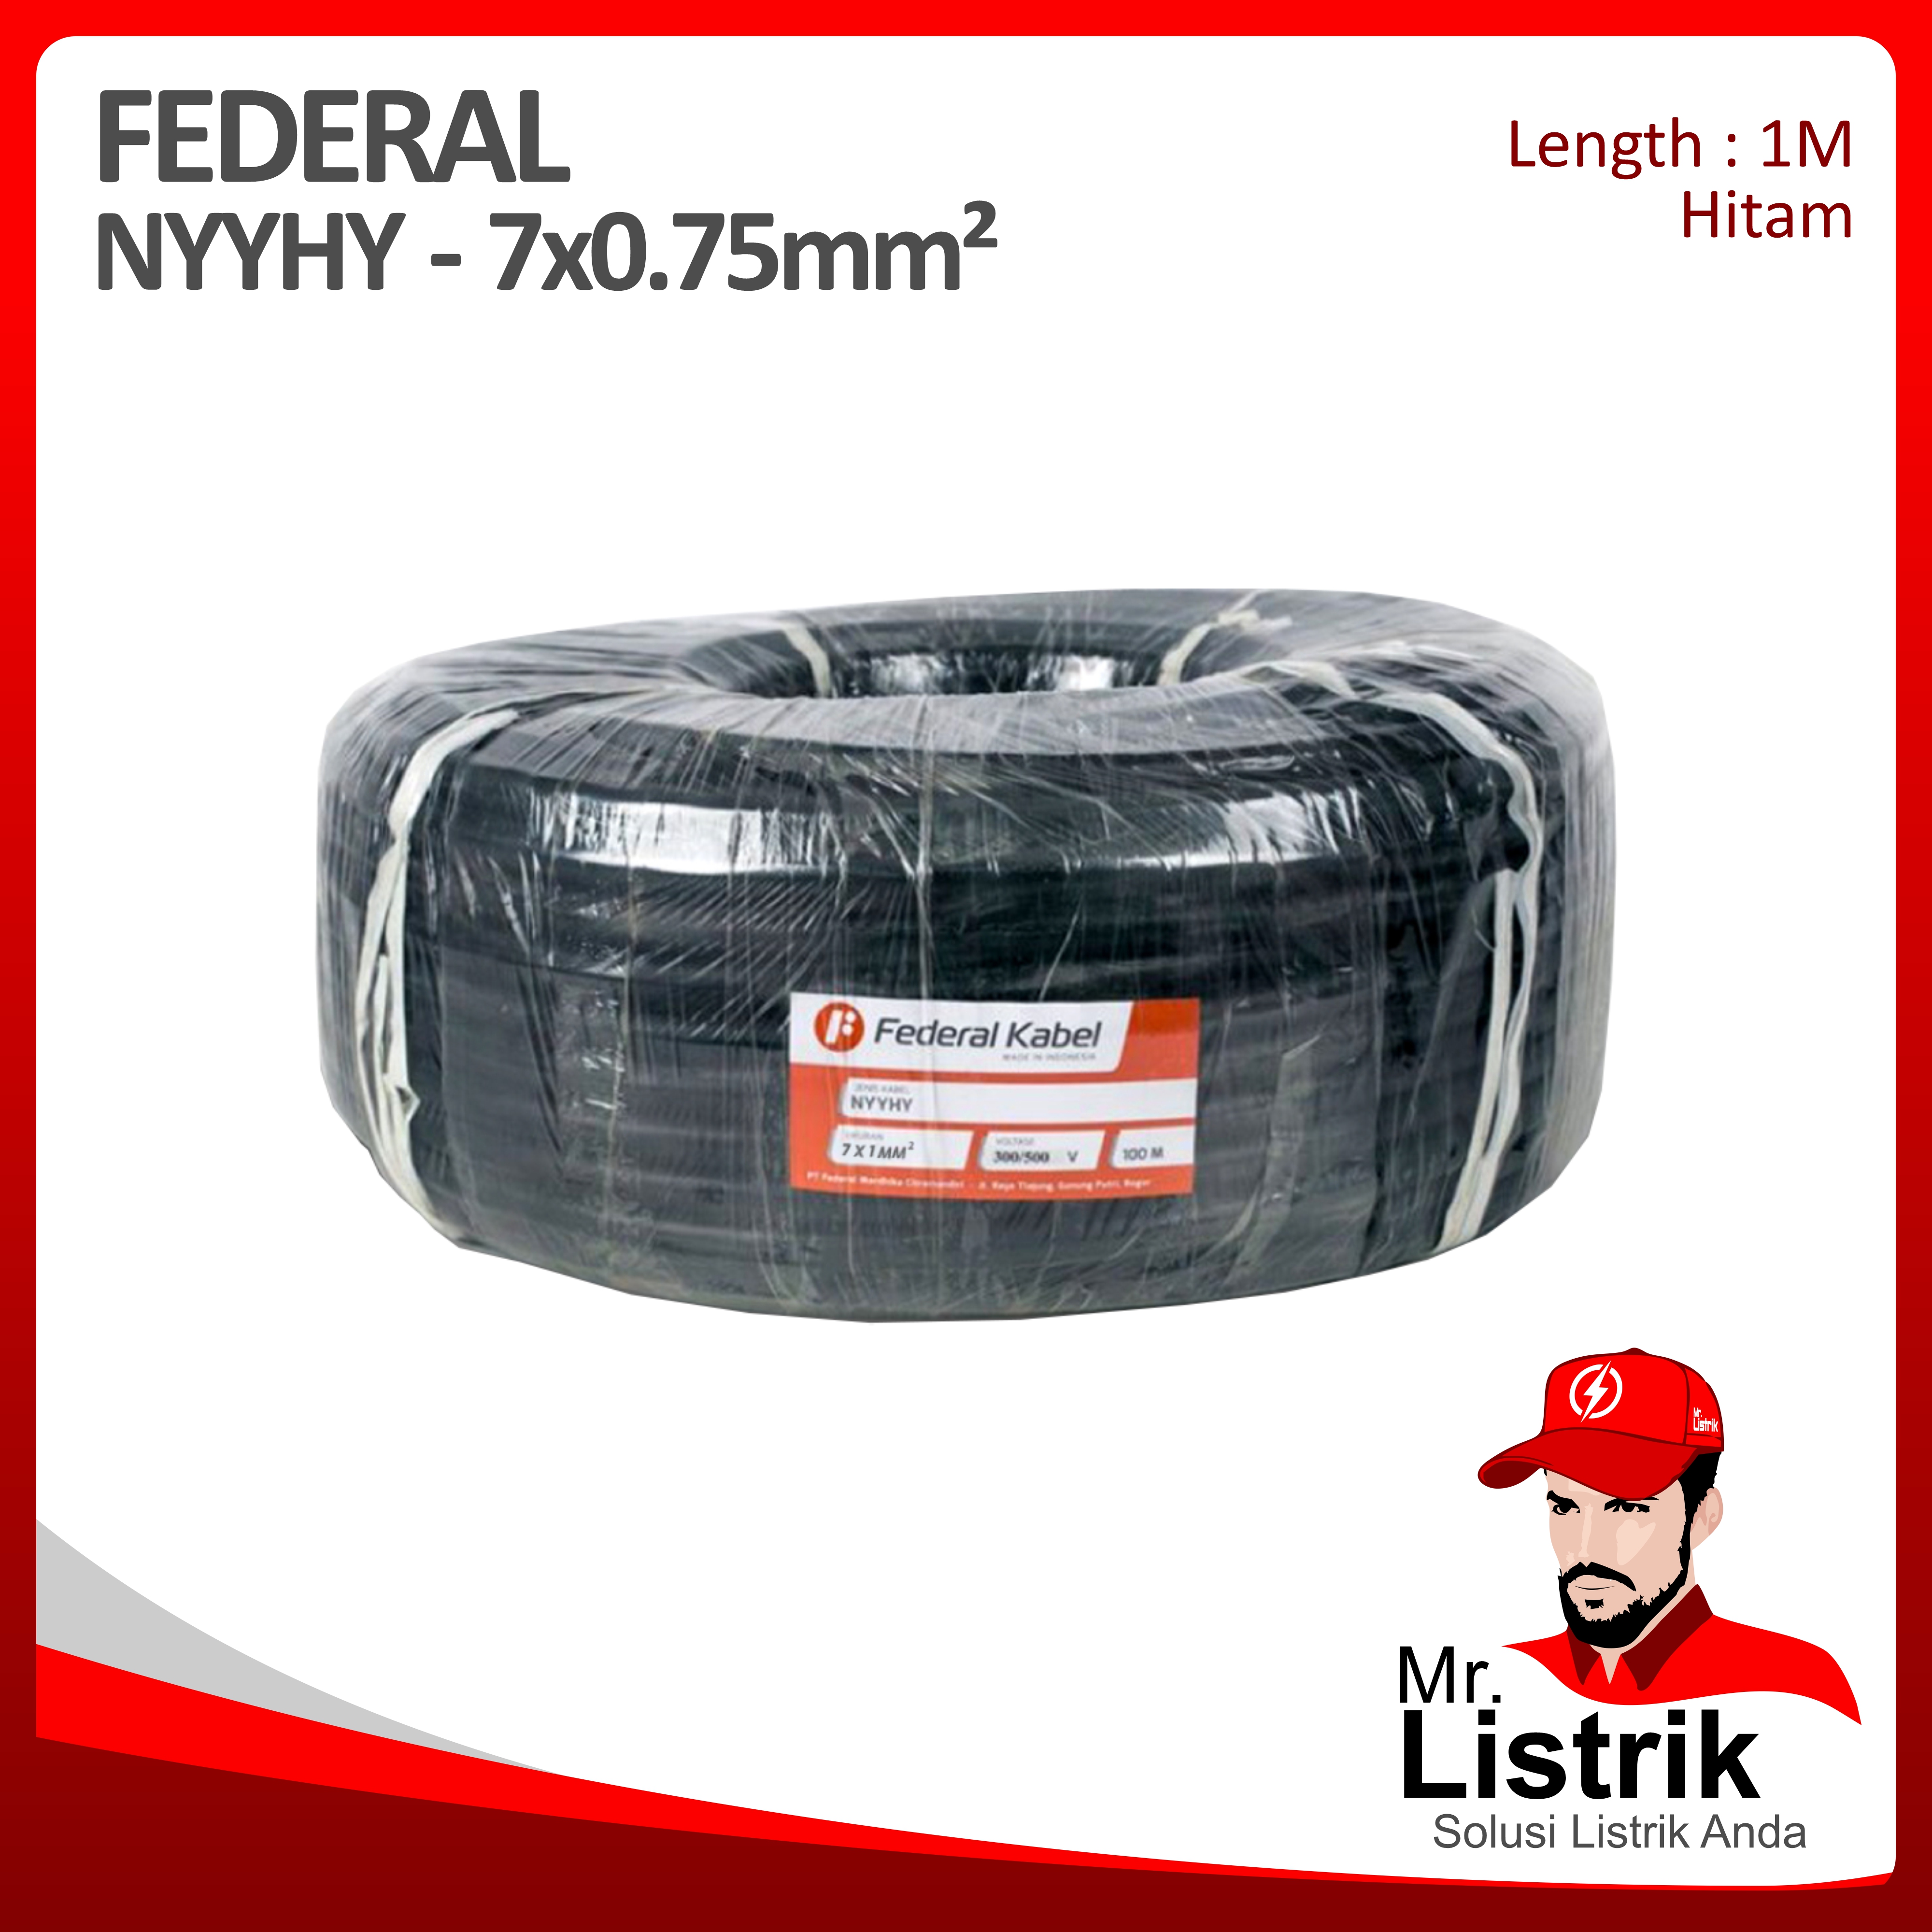 Kabel NYYHY Federal 7x0.75 mm² @1 Mtr